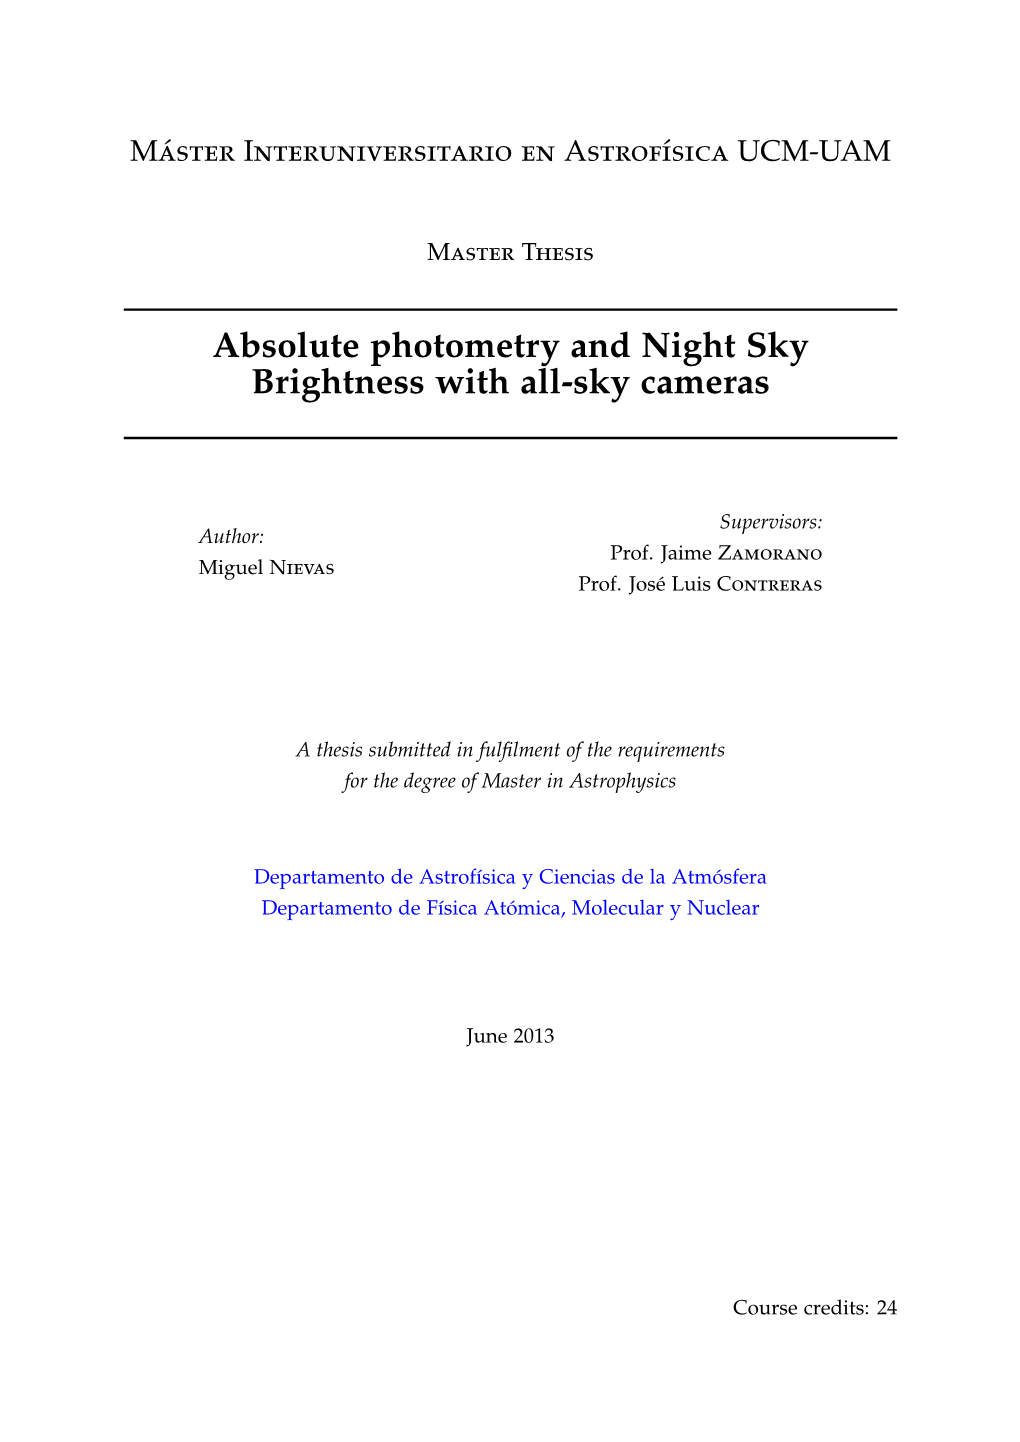 Absolute Photometry and Night Sky Brightness with All-Sky Cameras